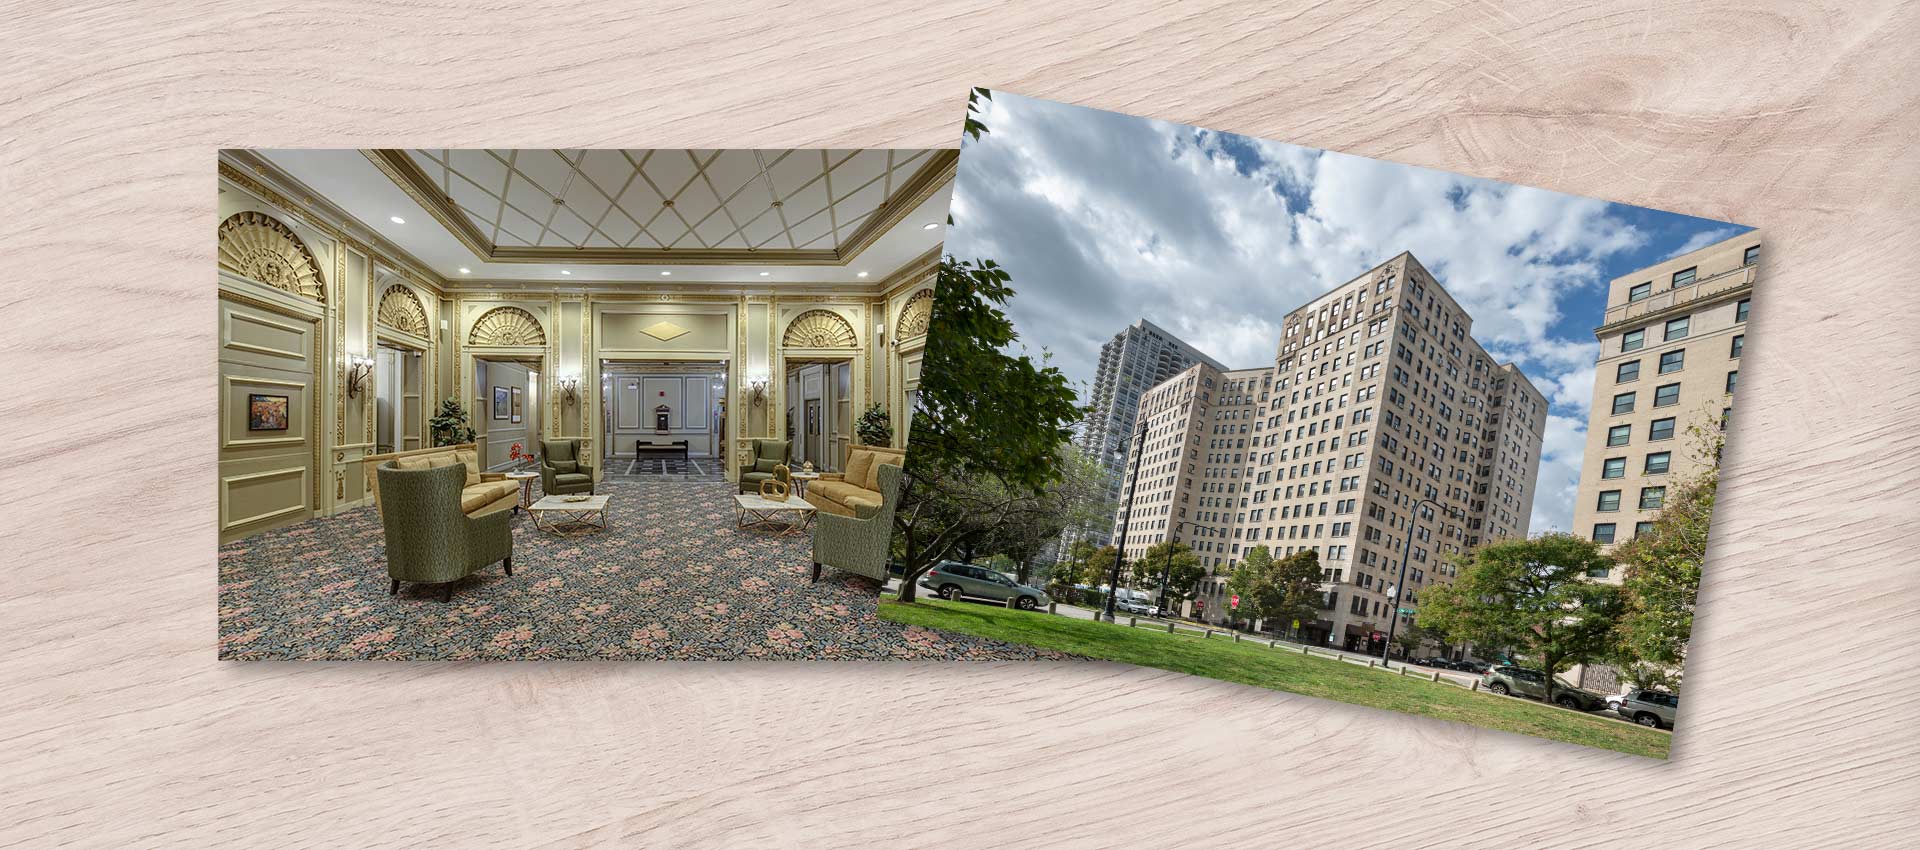 Real estate photos of outside of building and lobby